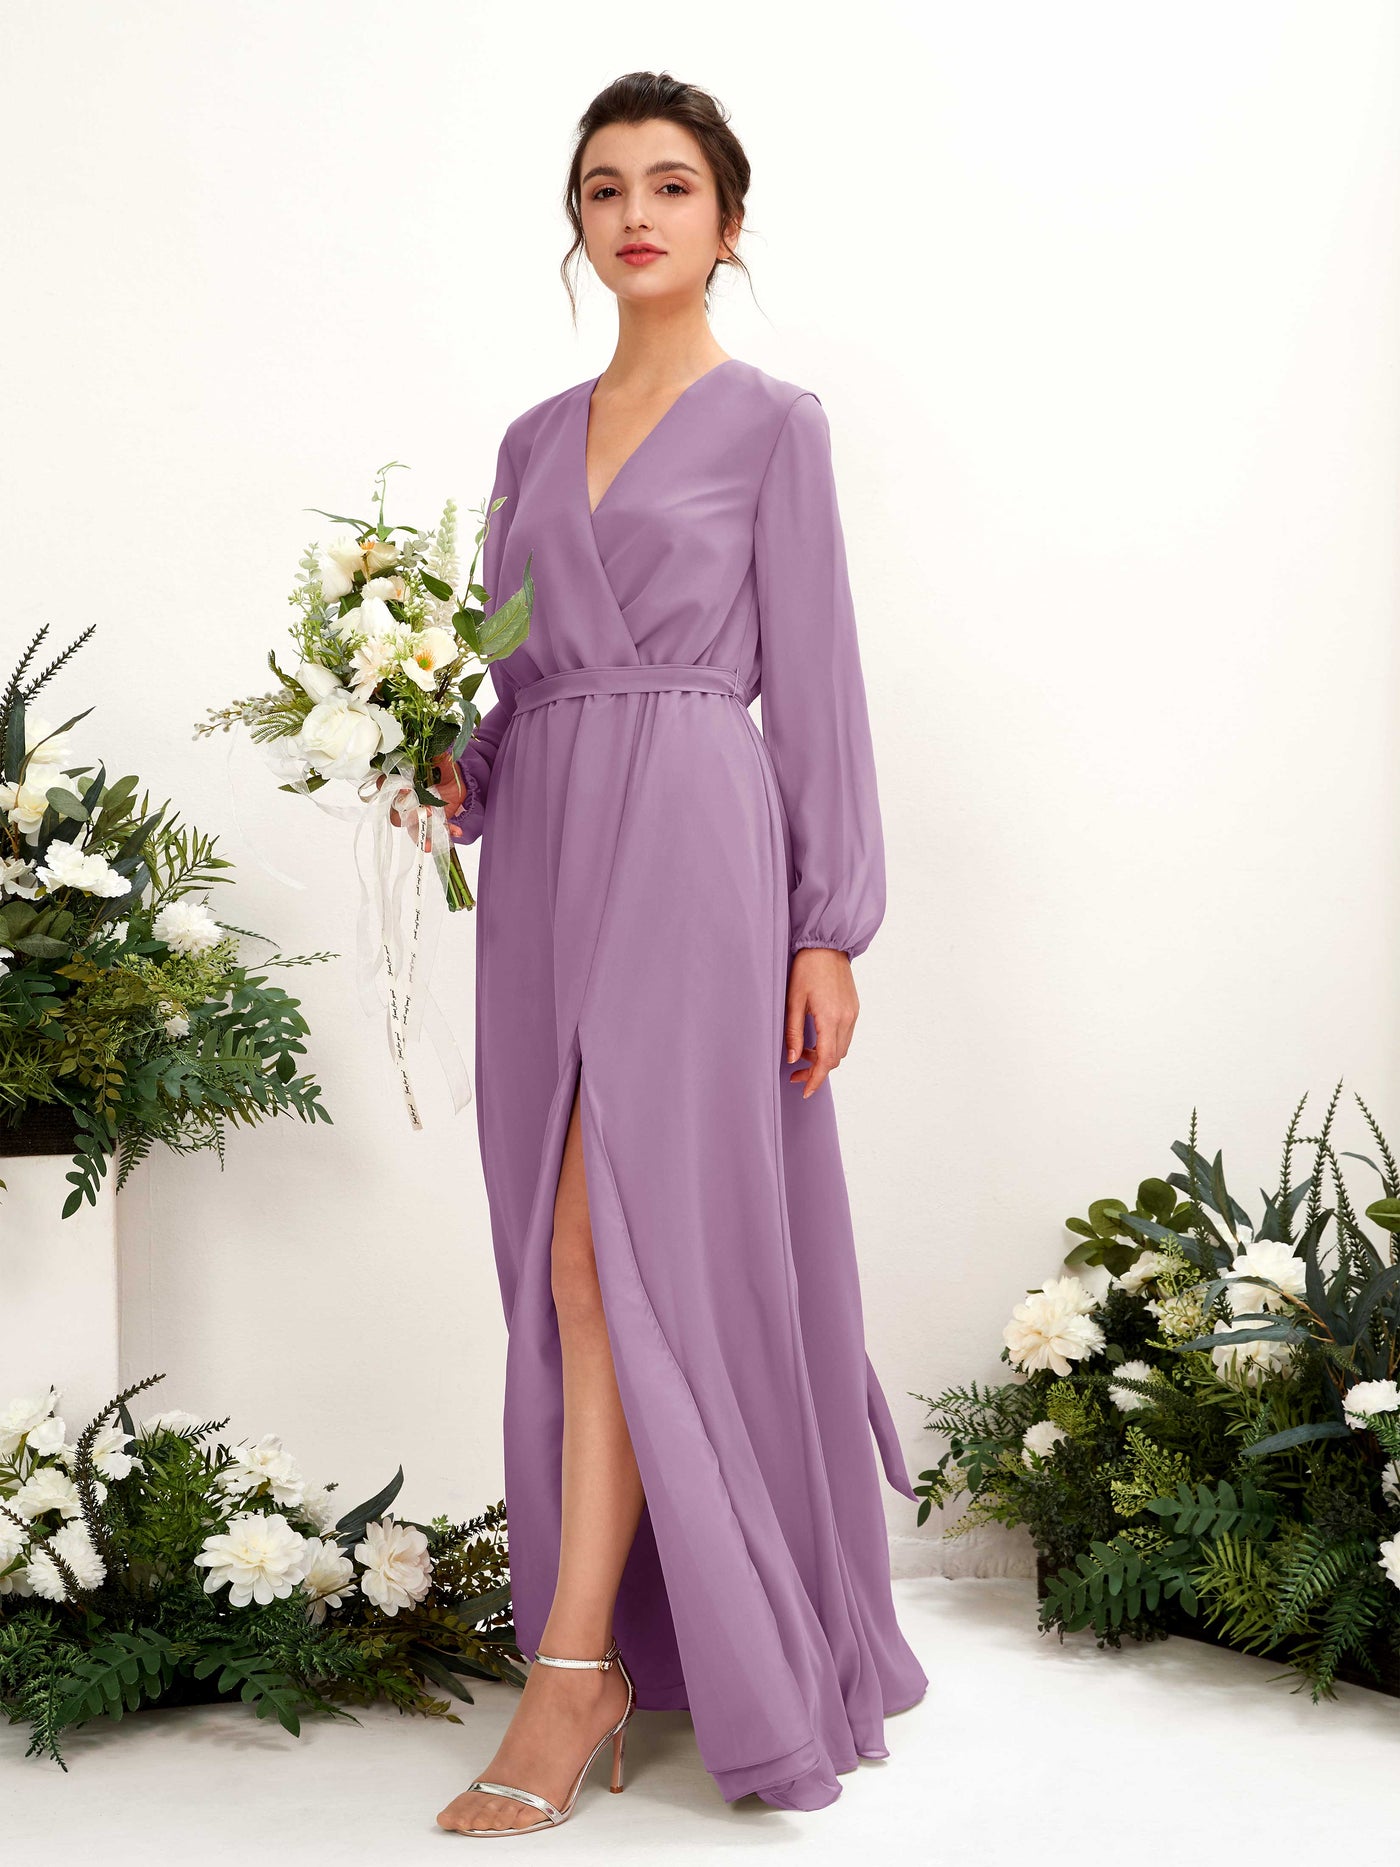 Orchid Mist Bridesmaid Dresses Bridesmaid Dress A-line Chiffon V-neck Full Length Long Sleeves Wedding Party Dress (81223221)#color_orchid-mist